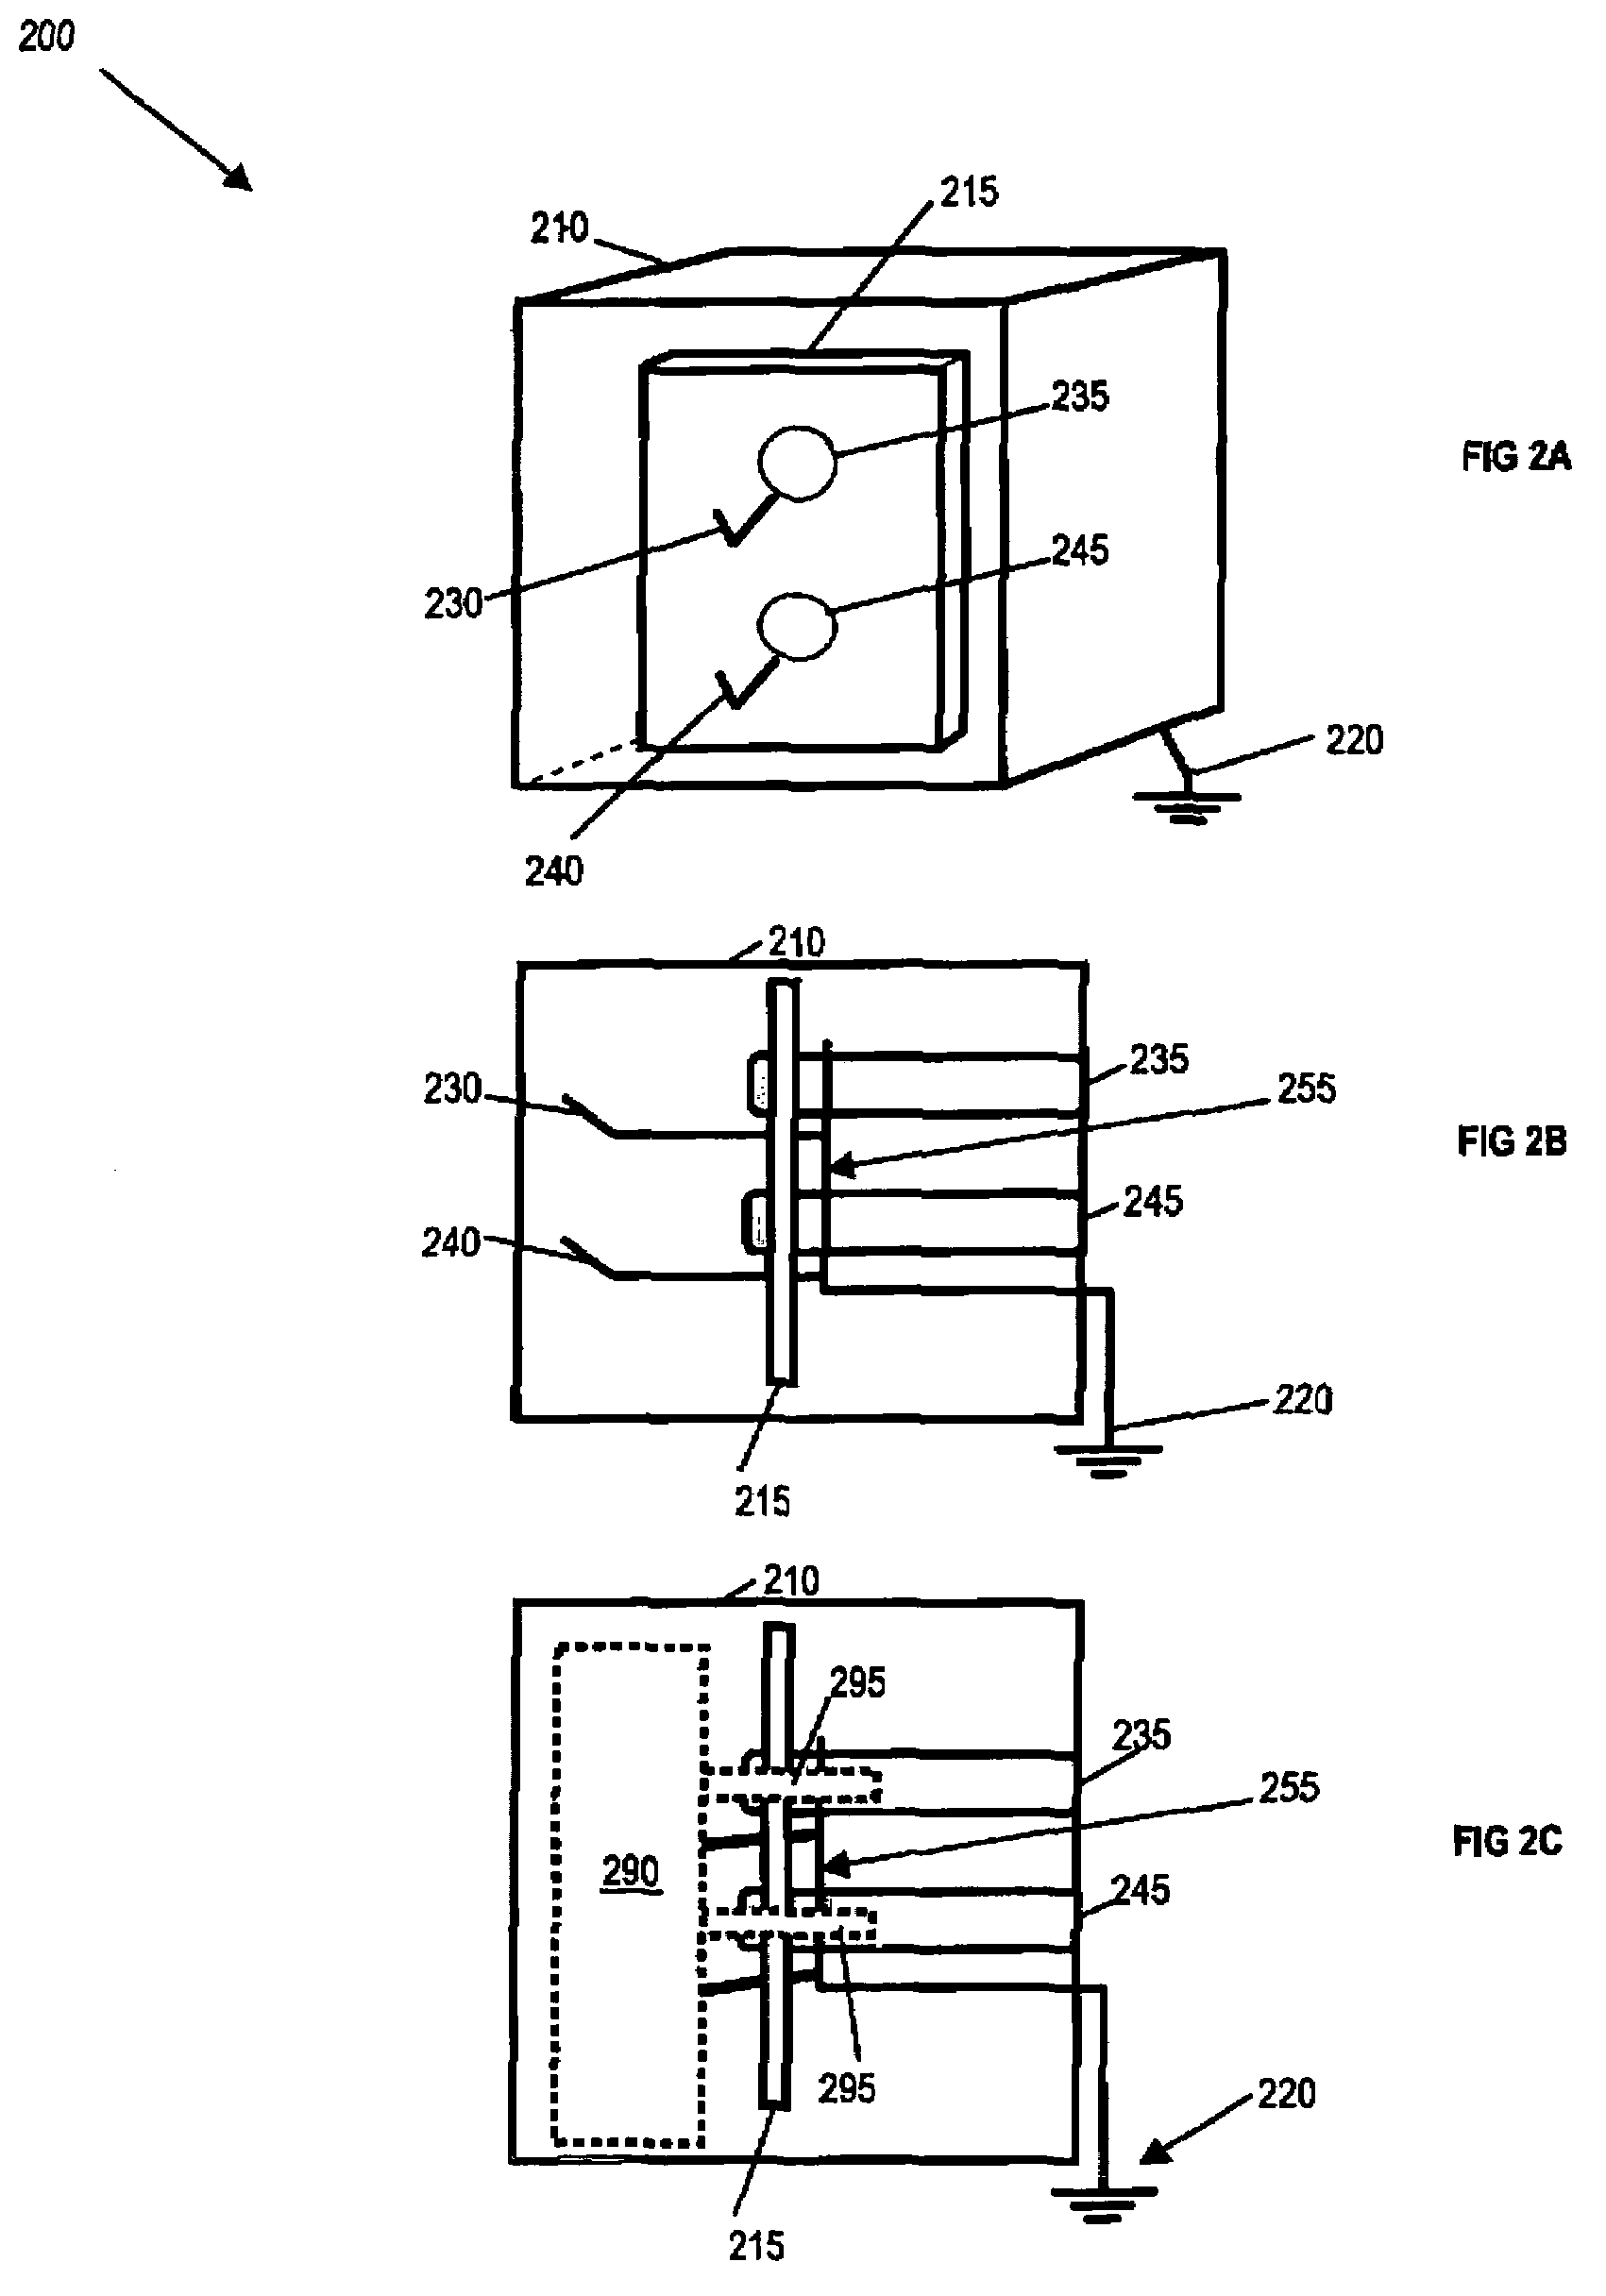 Methods and arrangements to attenuate an electrostatic charge on a cable prior to coupling the cable with an electronic system